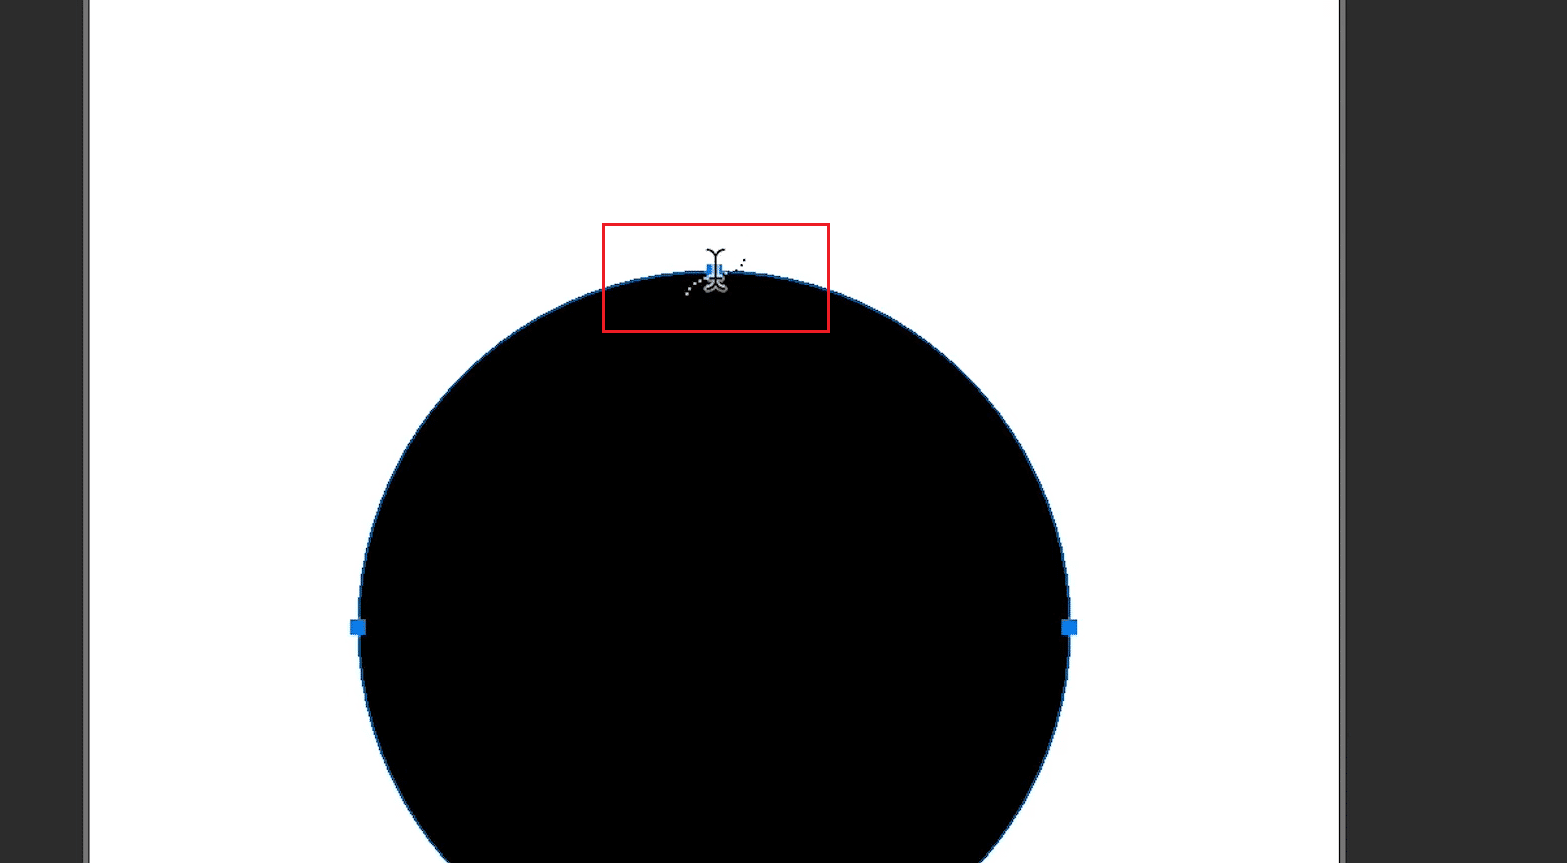 hover the type cursor over the edge of the circle and left-click on the circle edge